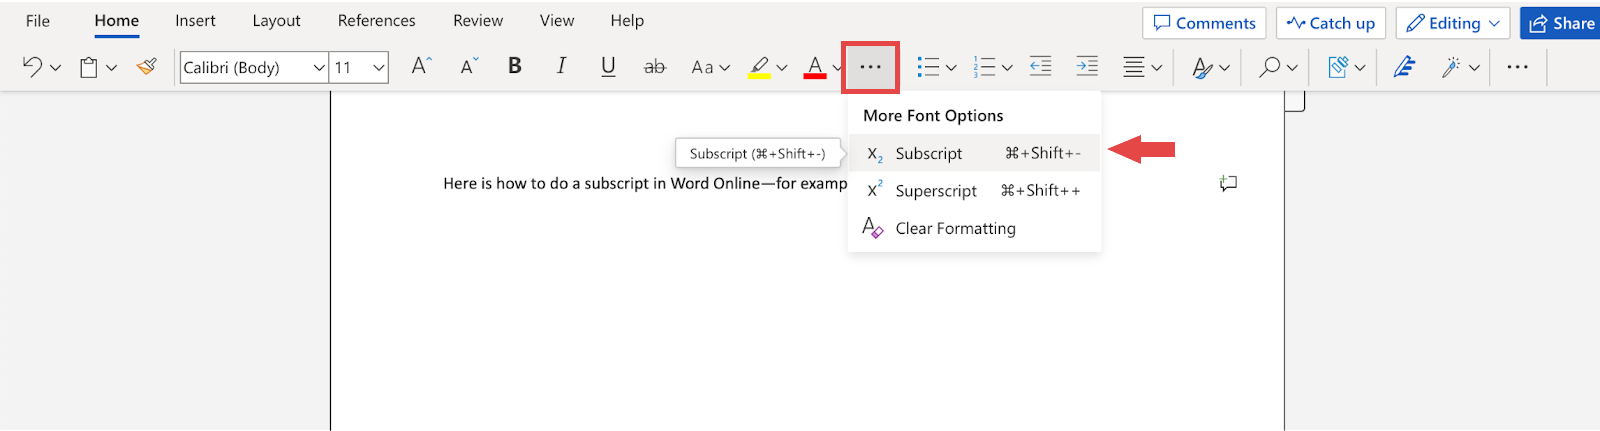 The “Subscript” and “Superscript” options can be found under “More Font Options.”